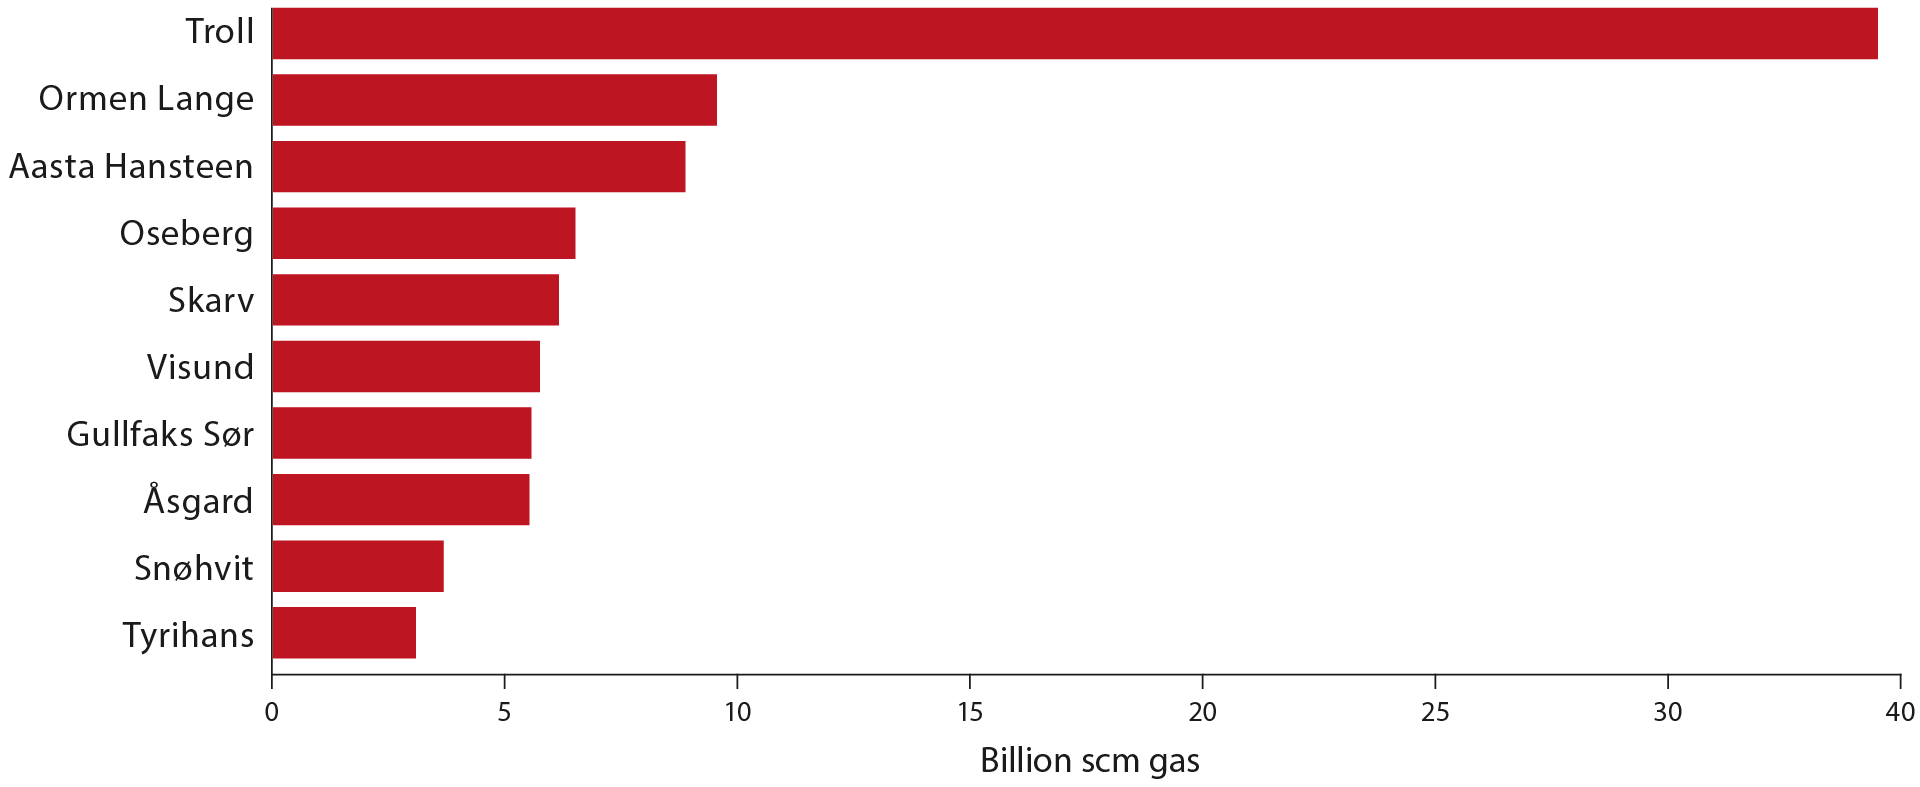 the figure shows the ten largest fields in 2022 measured by gas production, where Troill is the largest and Tyrihans the tenth largest